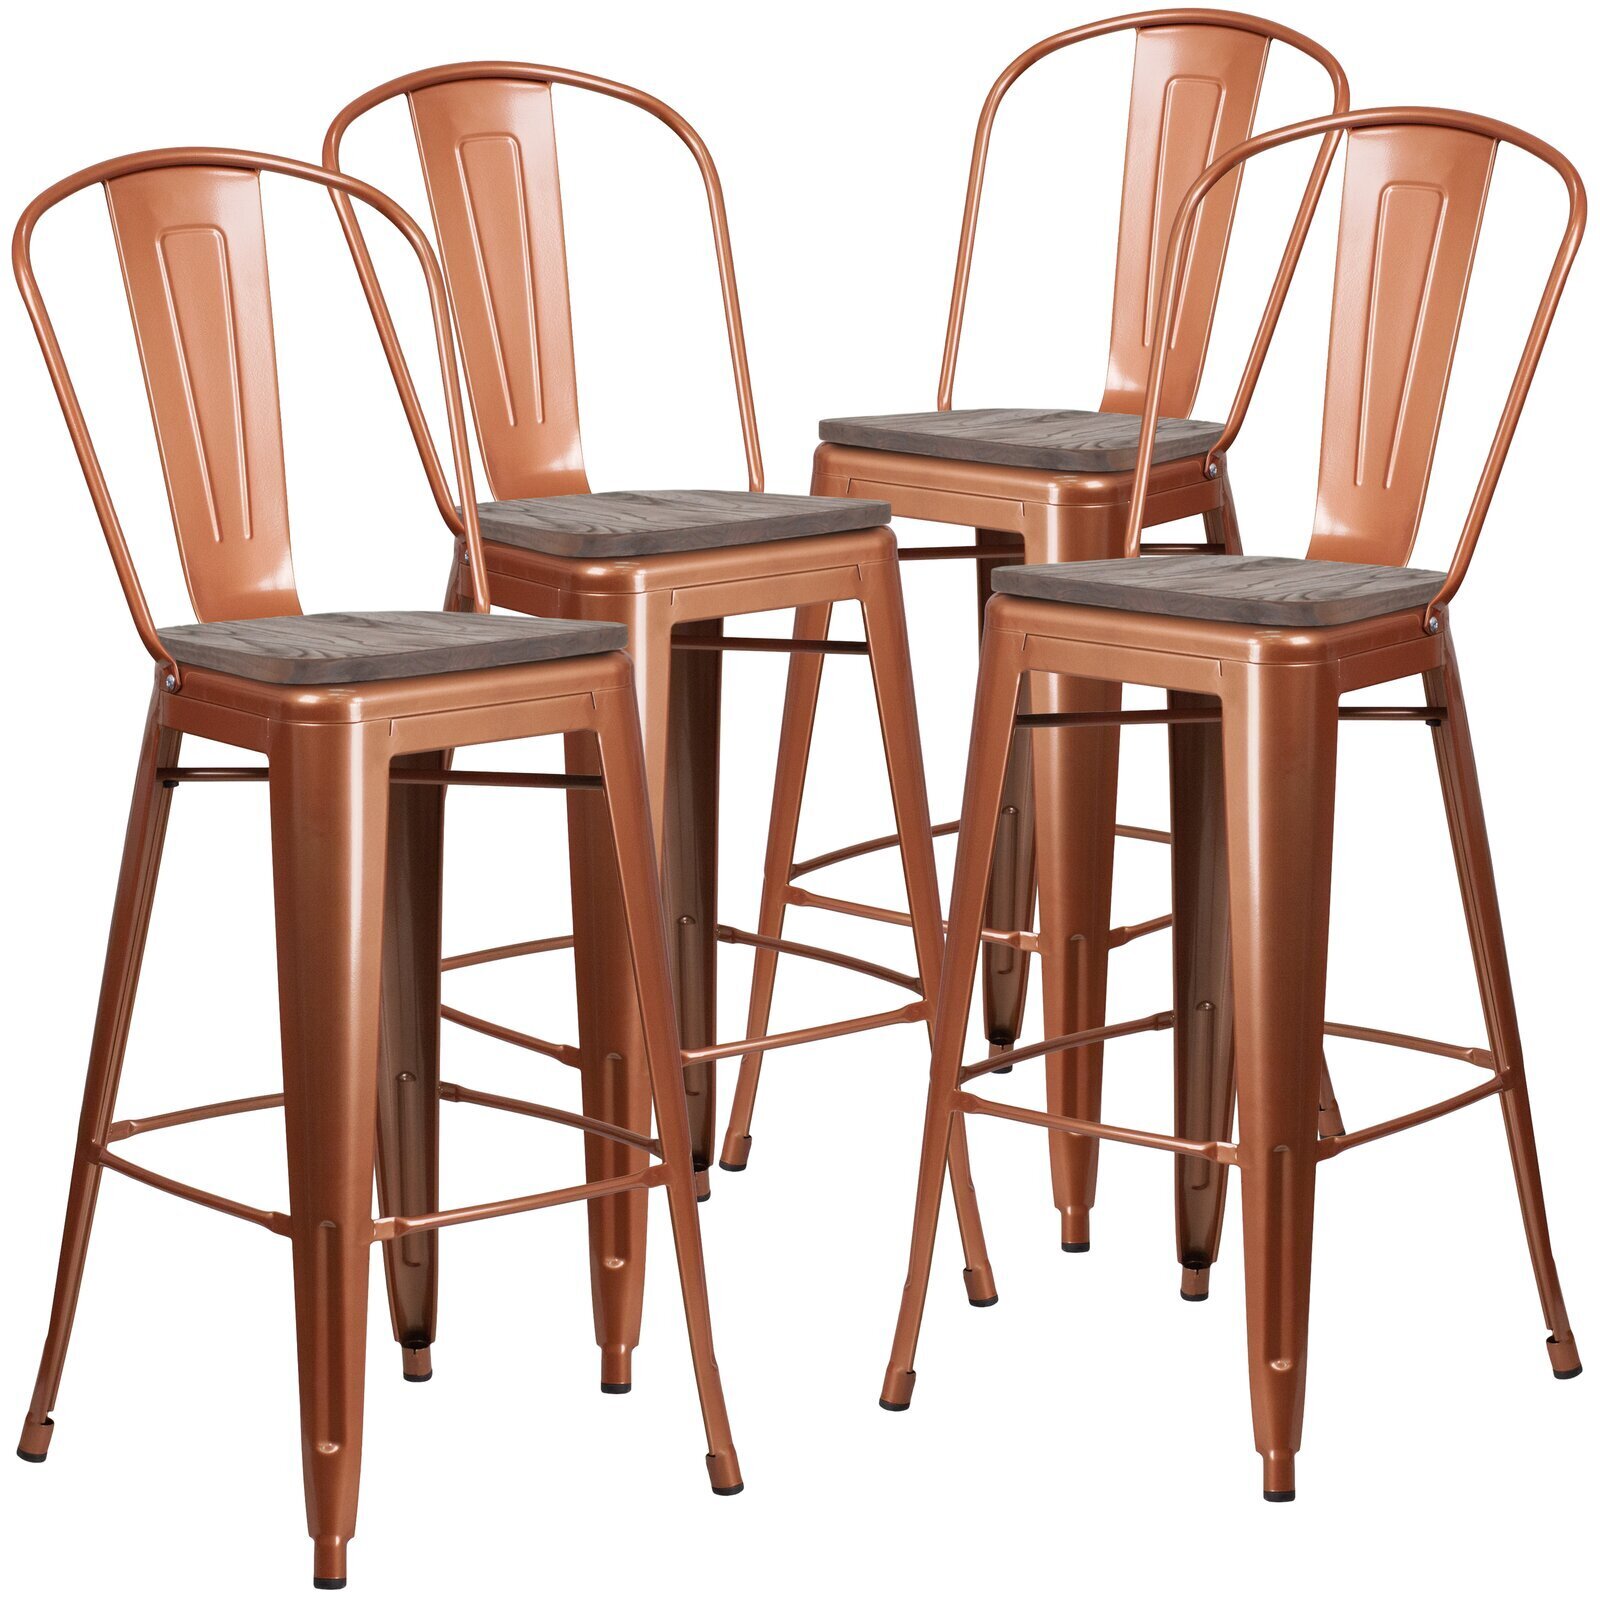 Bistro Style Copper Bar Stools With Backs